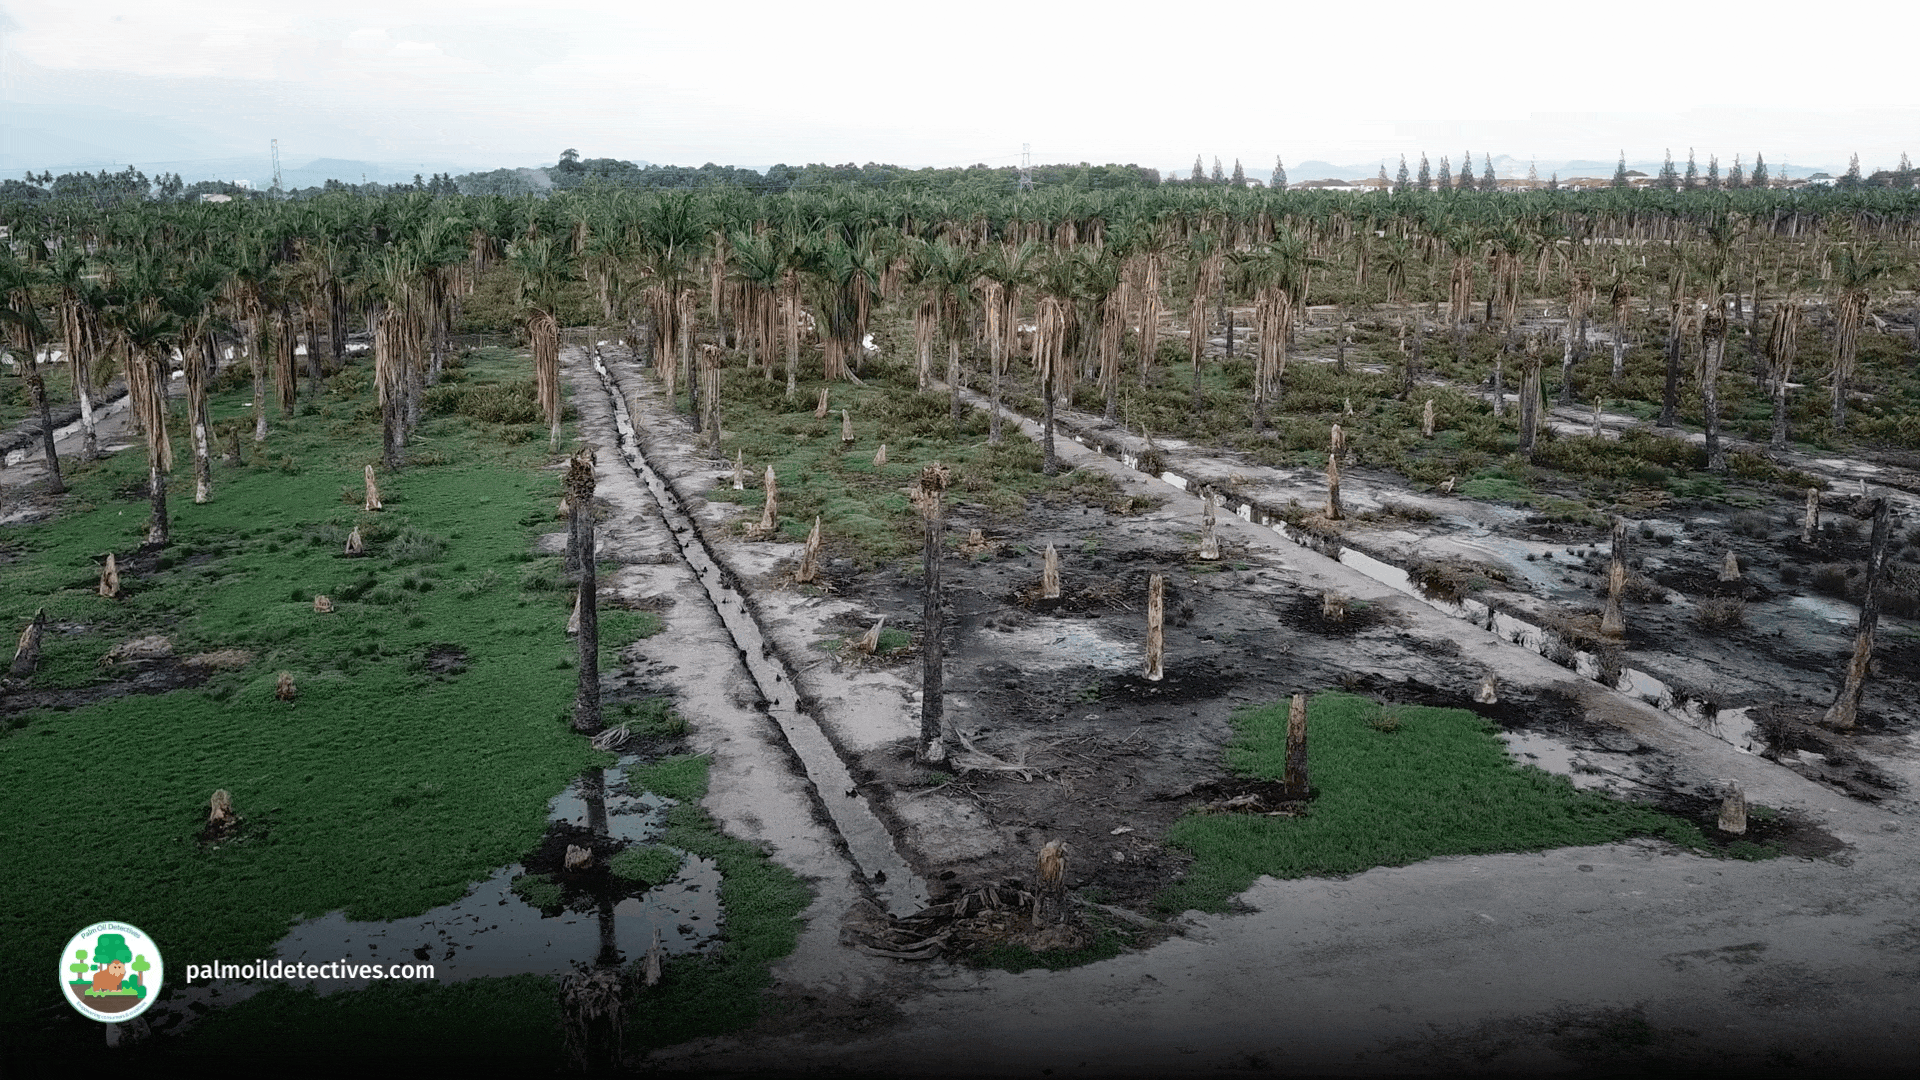 Deforestation for palm oil - Getty Images